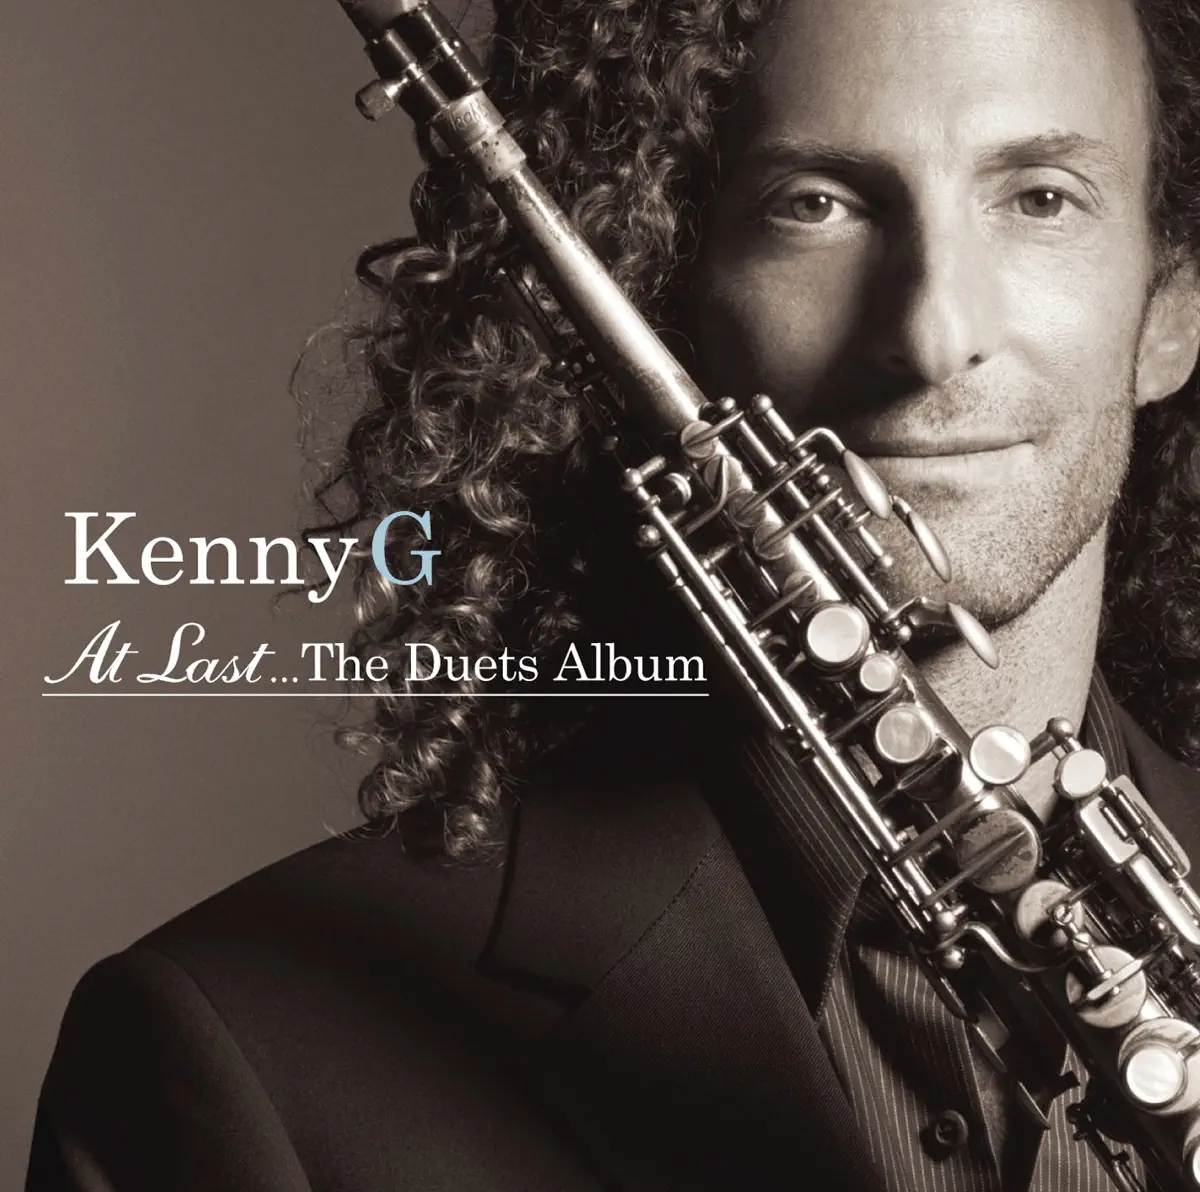 Kenny G - At Last...The Duets Album (2004) [iTunes Plus AAC M4A]-新房子